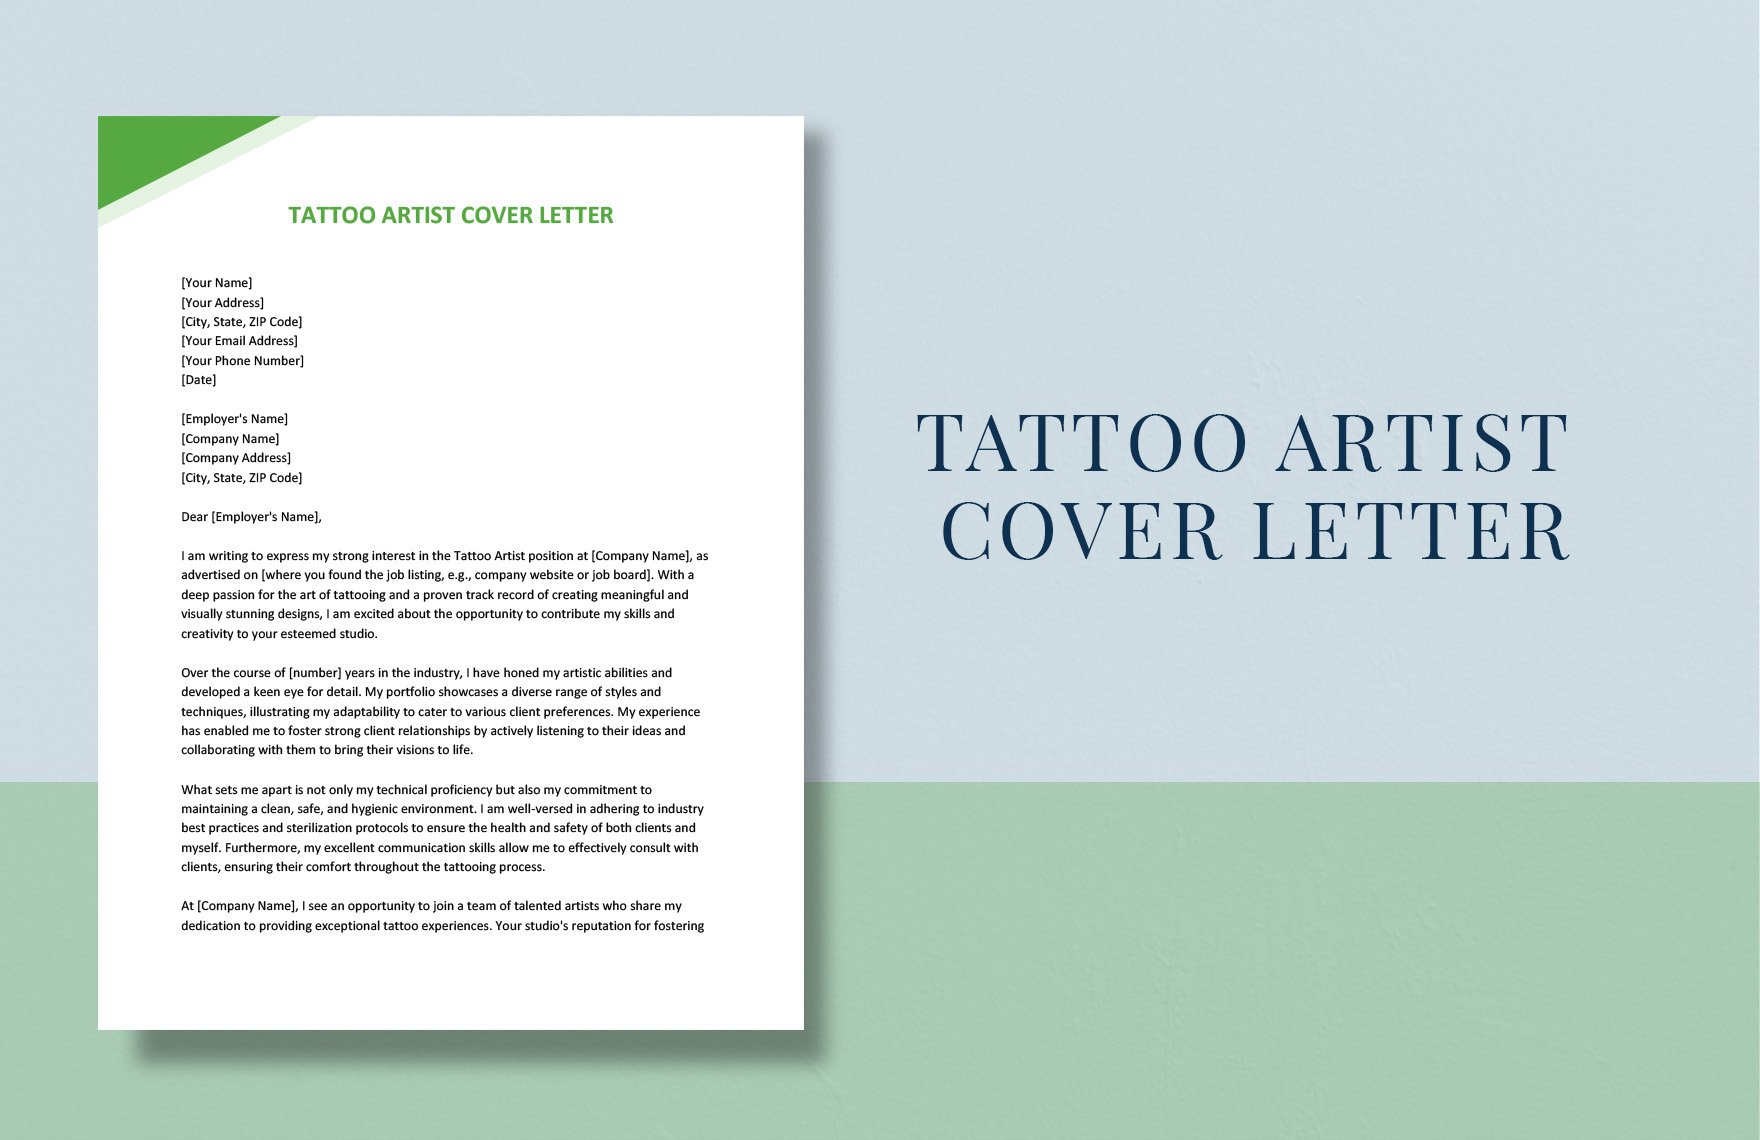 Tattoo Artist Cover Letter in Word, Google Docs